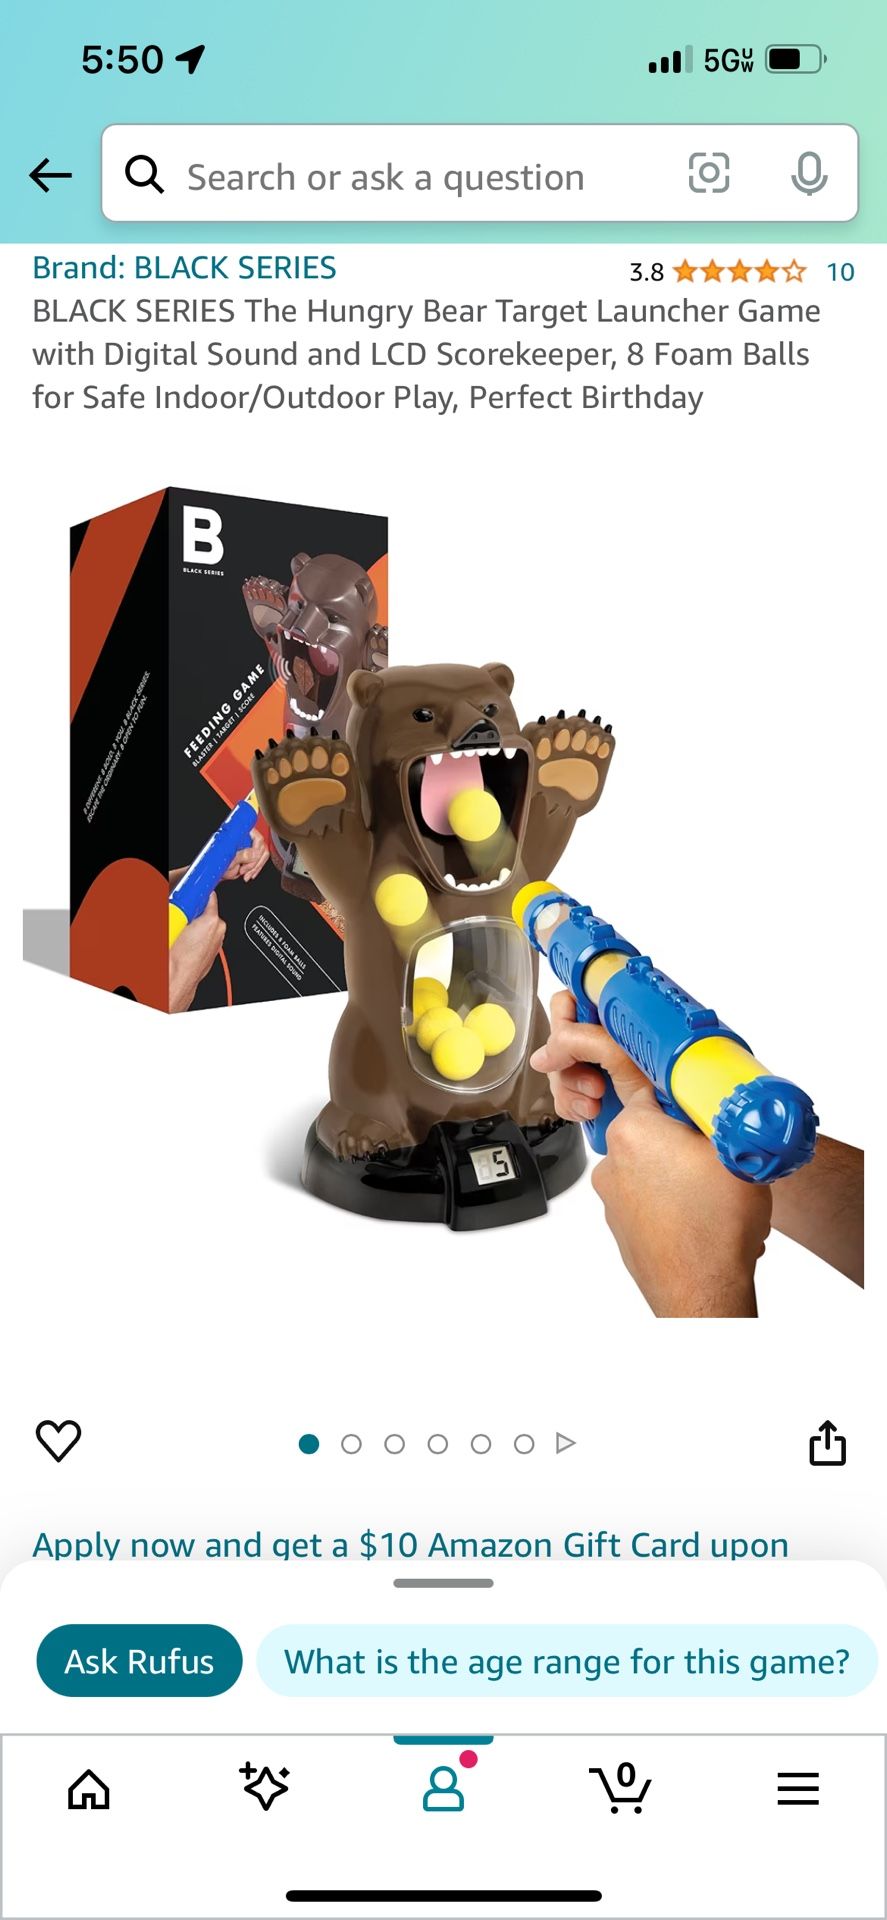 BRAND NEW THE HUNGRY BEAR TARGET LAUNCHER GAME